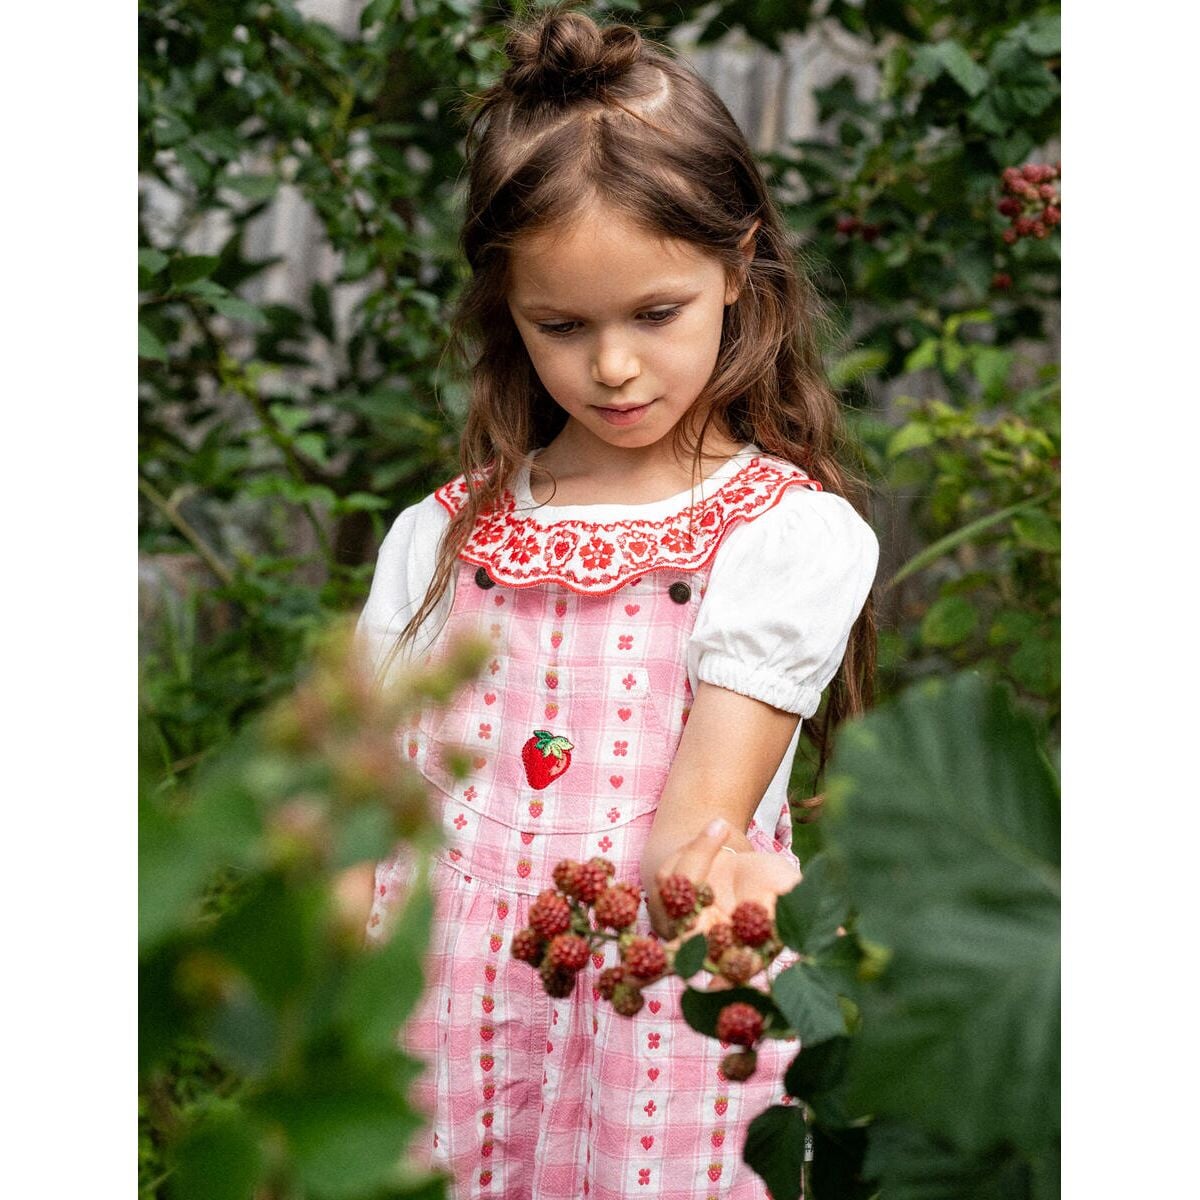 Goldie Vintage Overalls Very Berry Gingham